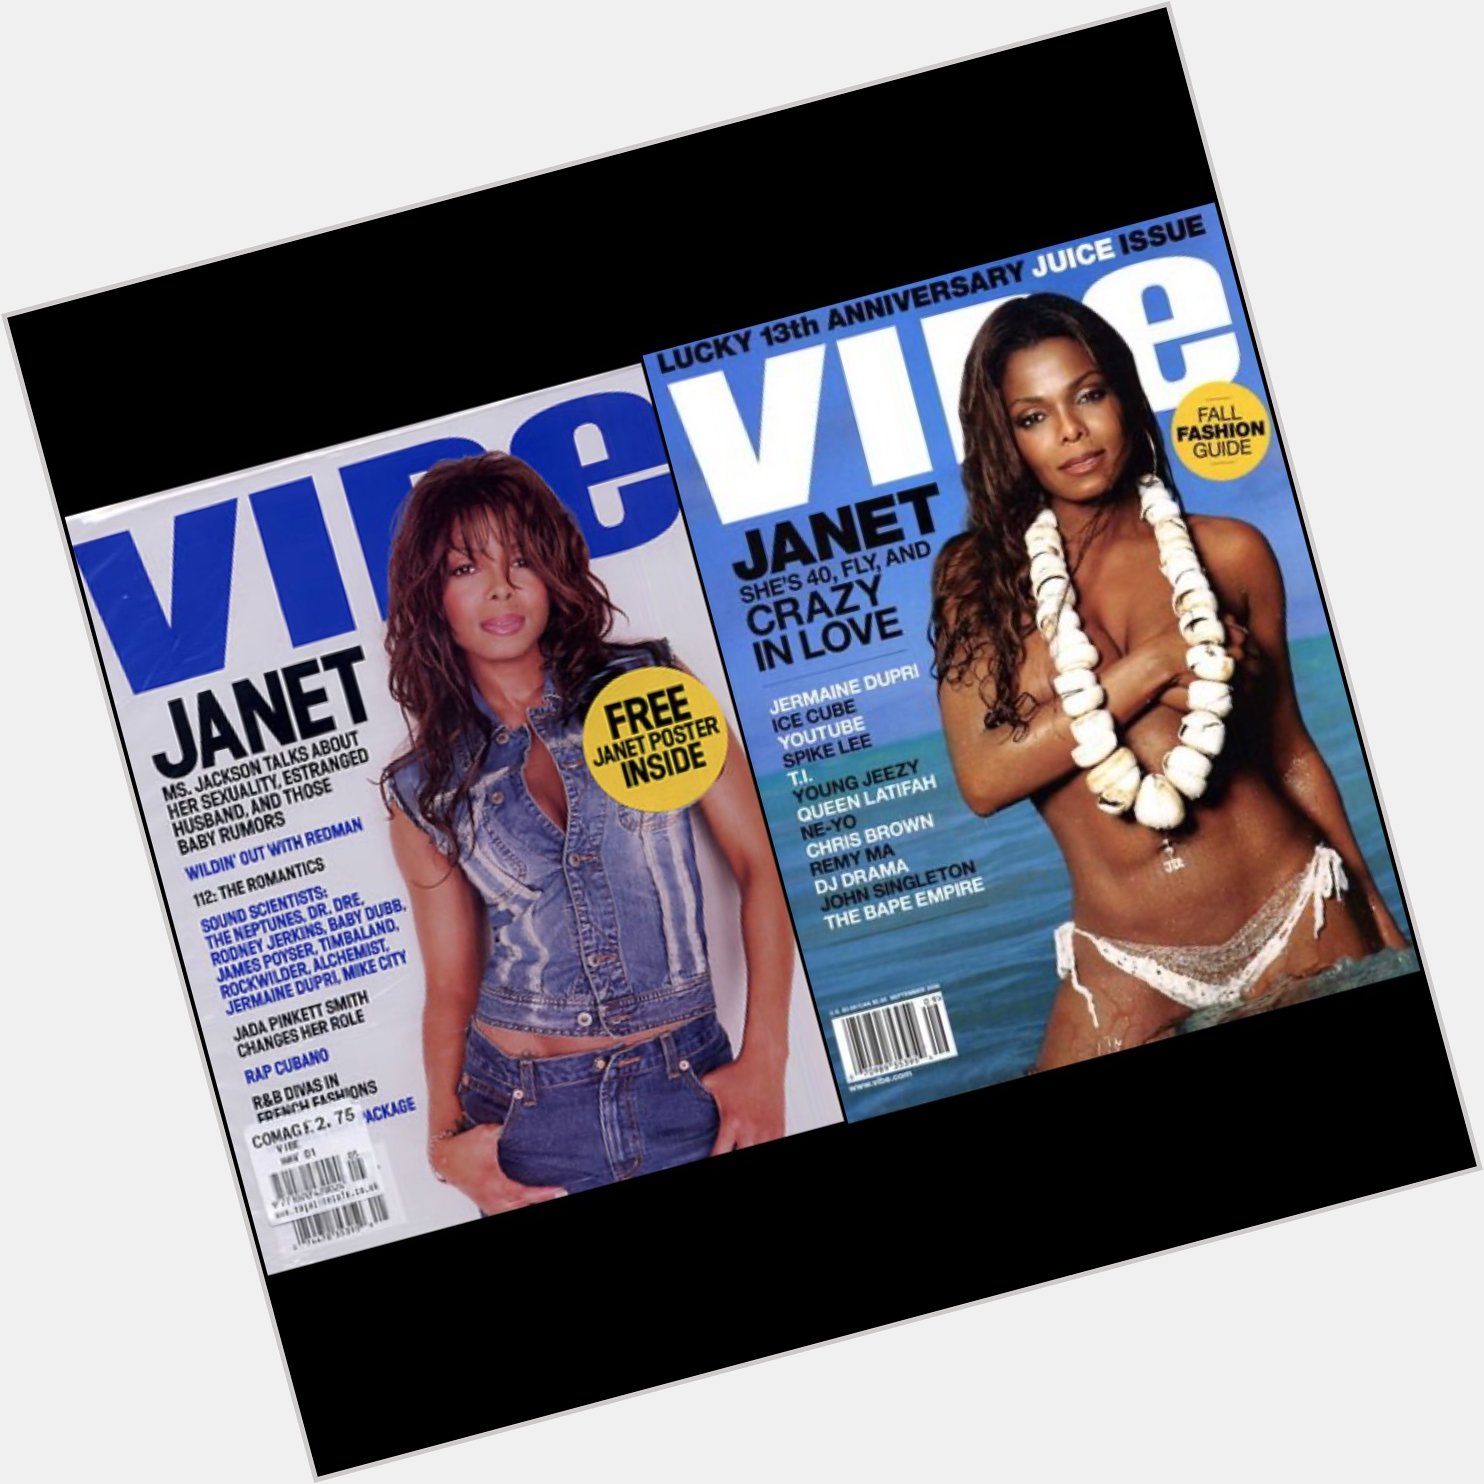 Happy Birthday to Janet Jackson! Listen to my two VIBE interviews with her here: 